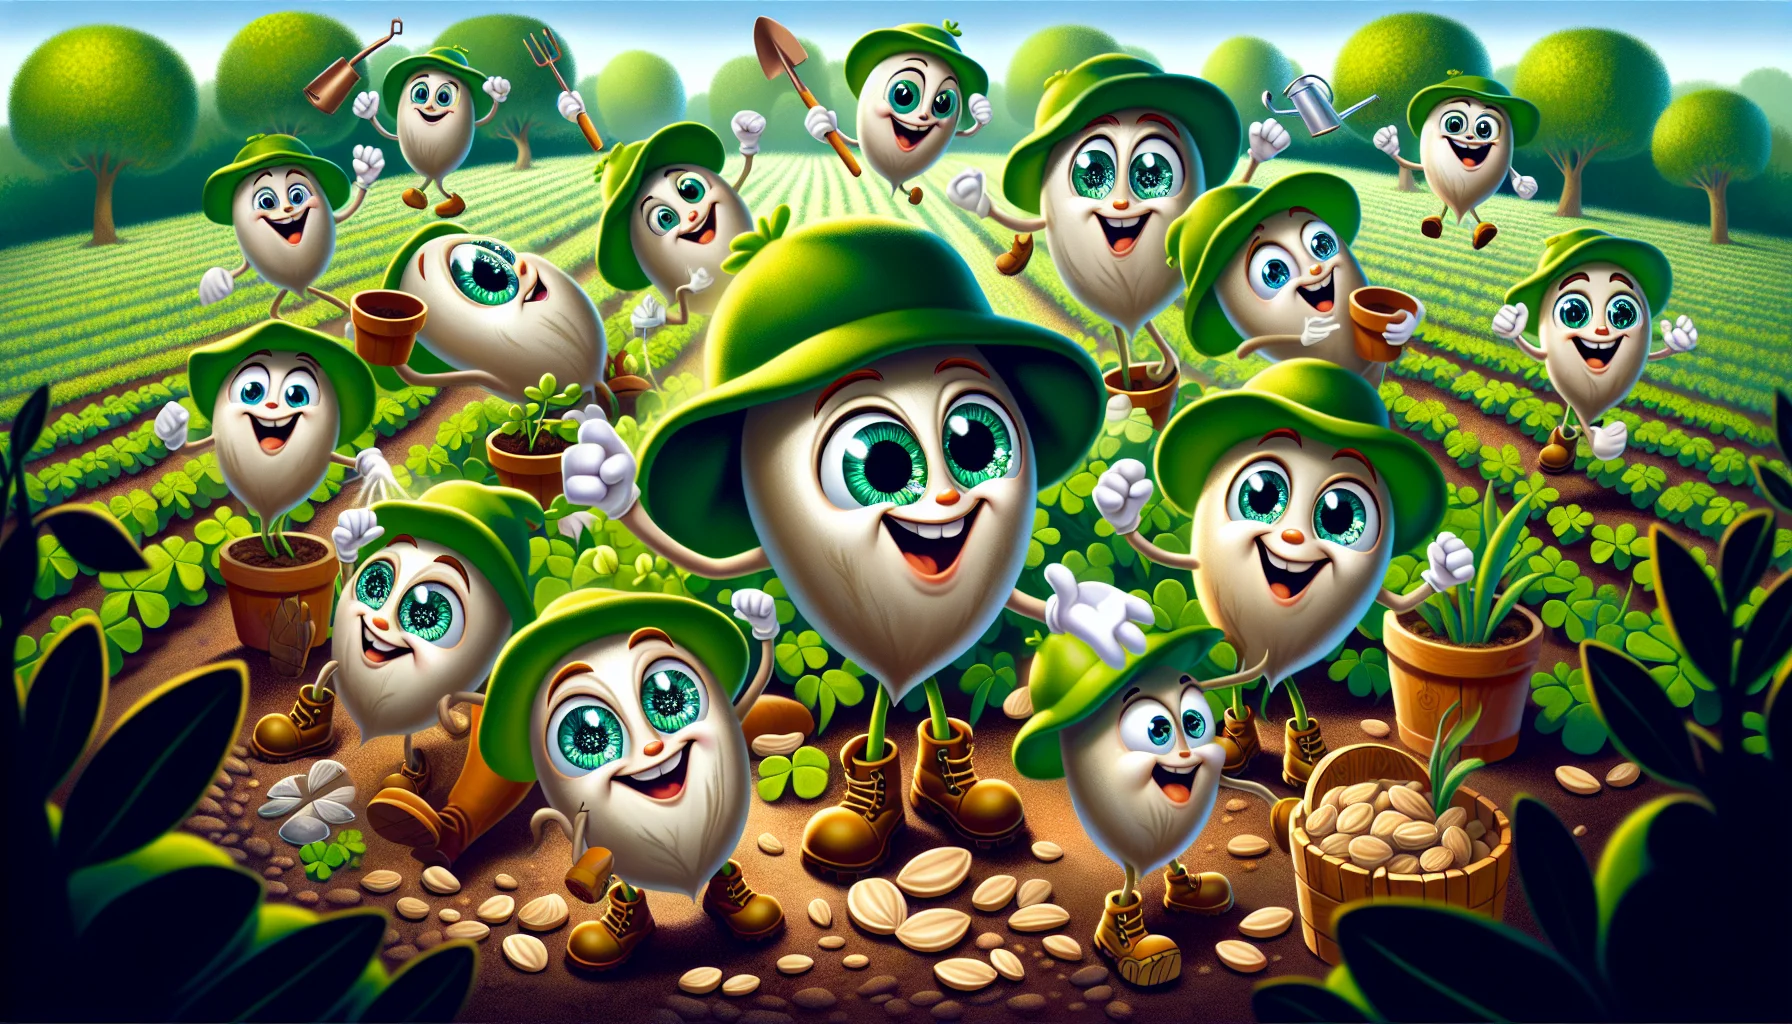 Illustrate a charming and humorous scene of Irish eyes garden seeds. Imagine a group of animated, anthropomorphic garden seeds of various types, each with a pair of twinkling Irish eyes and a smile to match, frolicking around in a lush garden. They are enthusiastically performing different gardening tasks like digging, planting, and watering, and seem to be having a great time. Their infectious energy and enjoyment is clearly designed to motivate viewers to join in the fun of gardening.